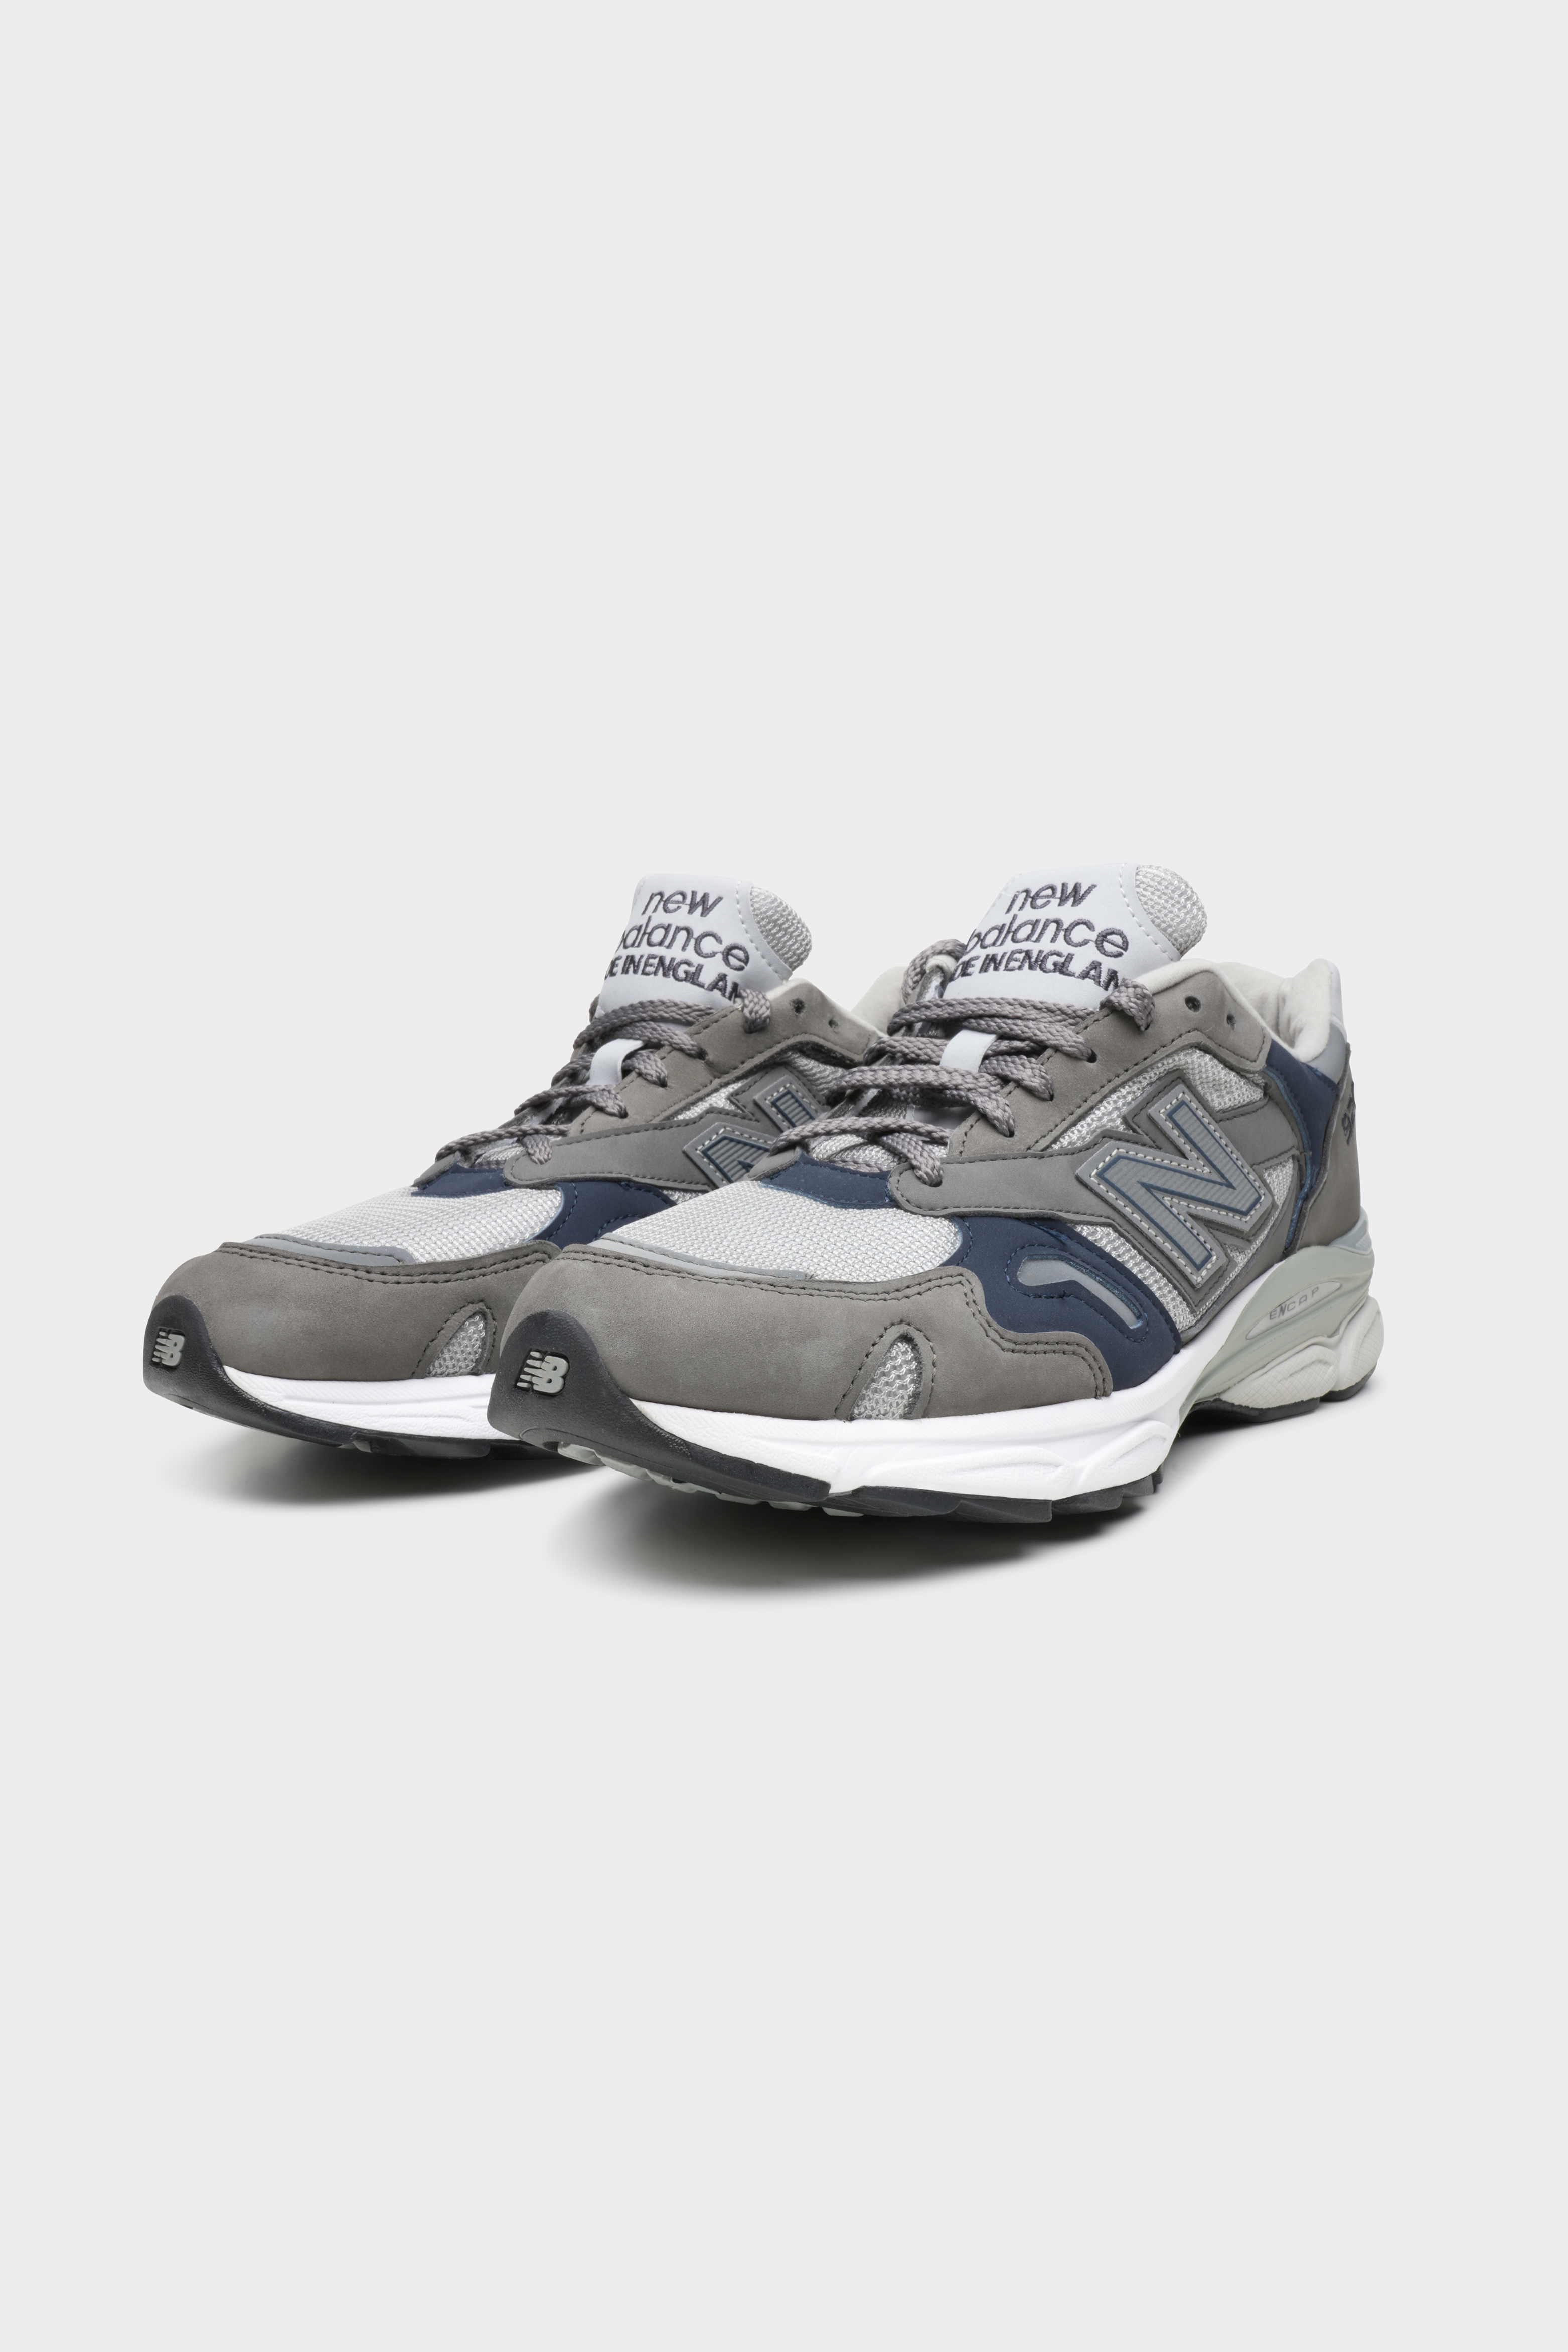 Selectshop FRAME - NEW BALANCE M920GNS "Made in England "Grey Navy" Footwear Concept Store Dubai